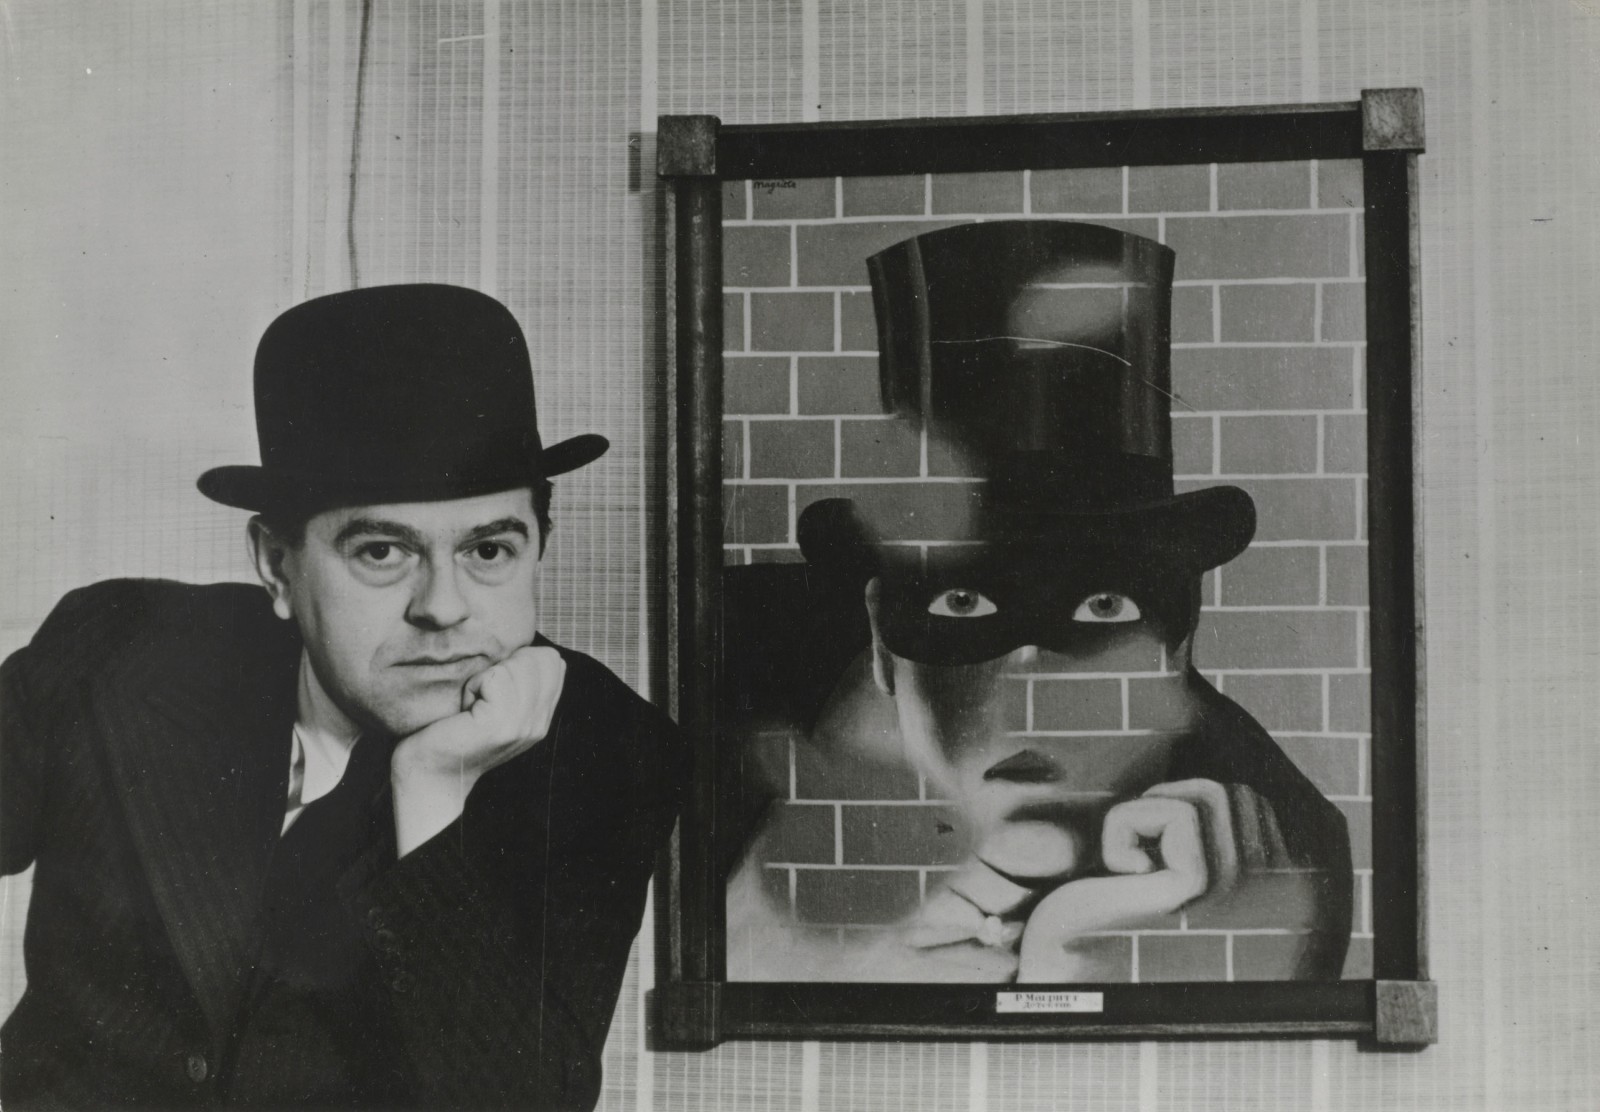 Photographer unknown. René Magritte and Le Barbare (The Barbarian), 1938. Gelatin silver print; 18.8 × 25 cm (7 3/8 × 9 7/8 in.). The Baltimore Museum of Art. Purchase with exchange funds from the Edward Joseph Gallagher III Memorial Collection; and partial gift of George H. Dalsheimer, Baltimore (BMA.1988.440). © Charly Herscovici—ADAGP—ARS, 2014